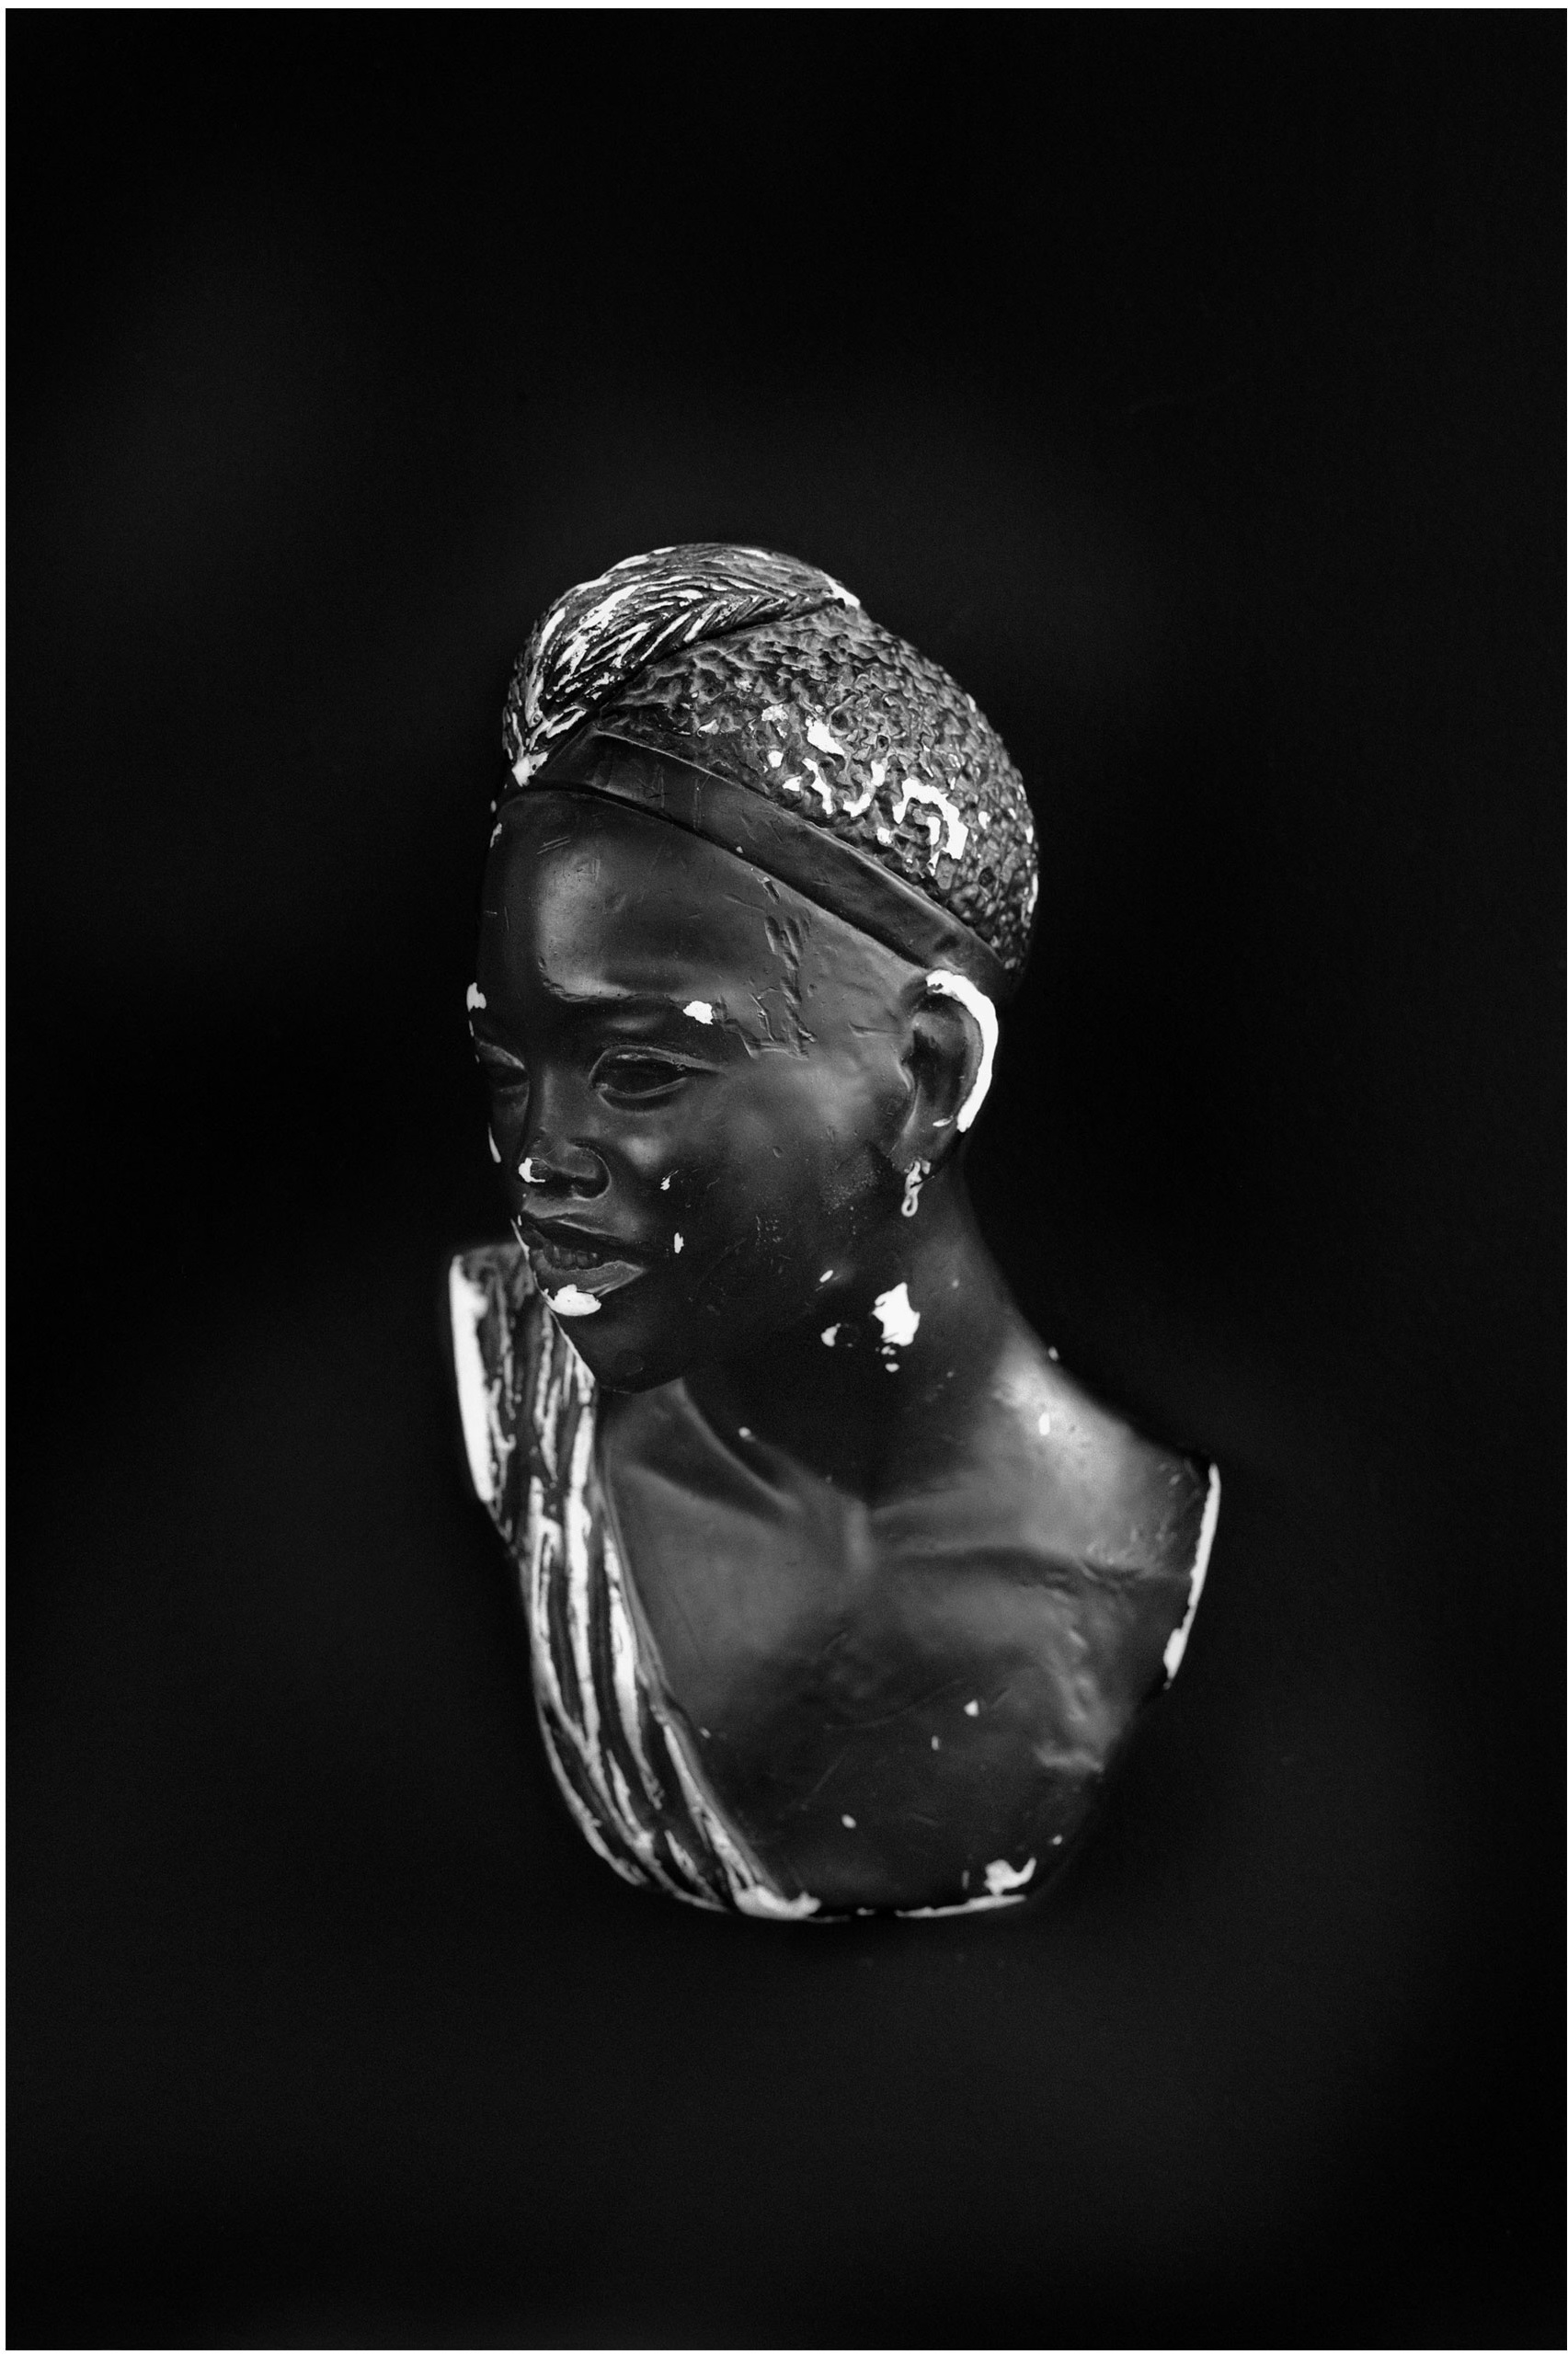 DAVID ADIKA
UNTITLED (FIGURINE, 'MIZRACHI', NO. 006 A) FROM “BLACK MARKET” , 2020
Color photography, inkjet print in varying dimensions
78 x 110 cm. (30.71 x 43.31 in.)
Edition 1 of 3, with 2 APs